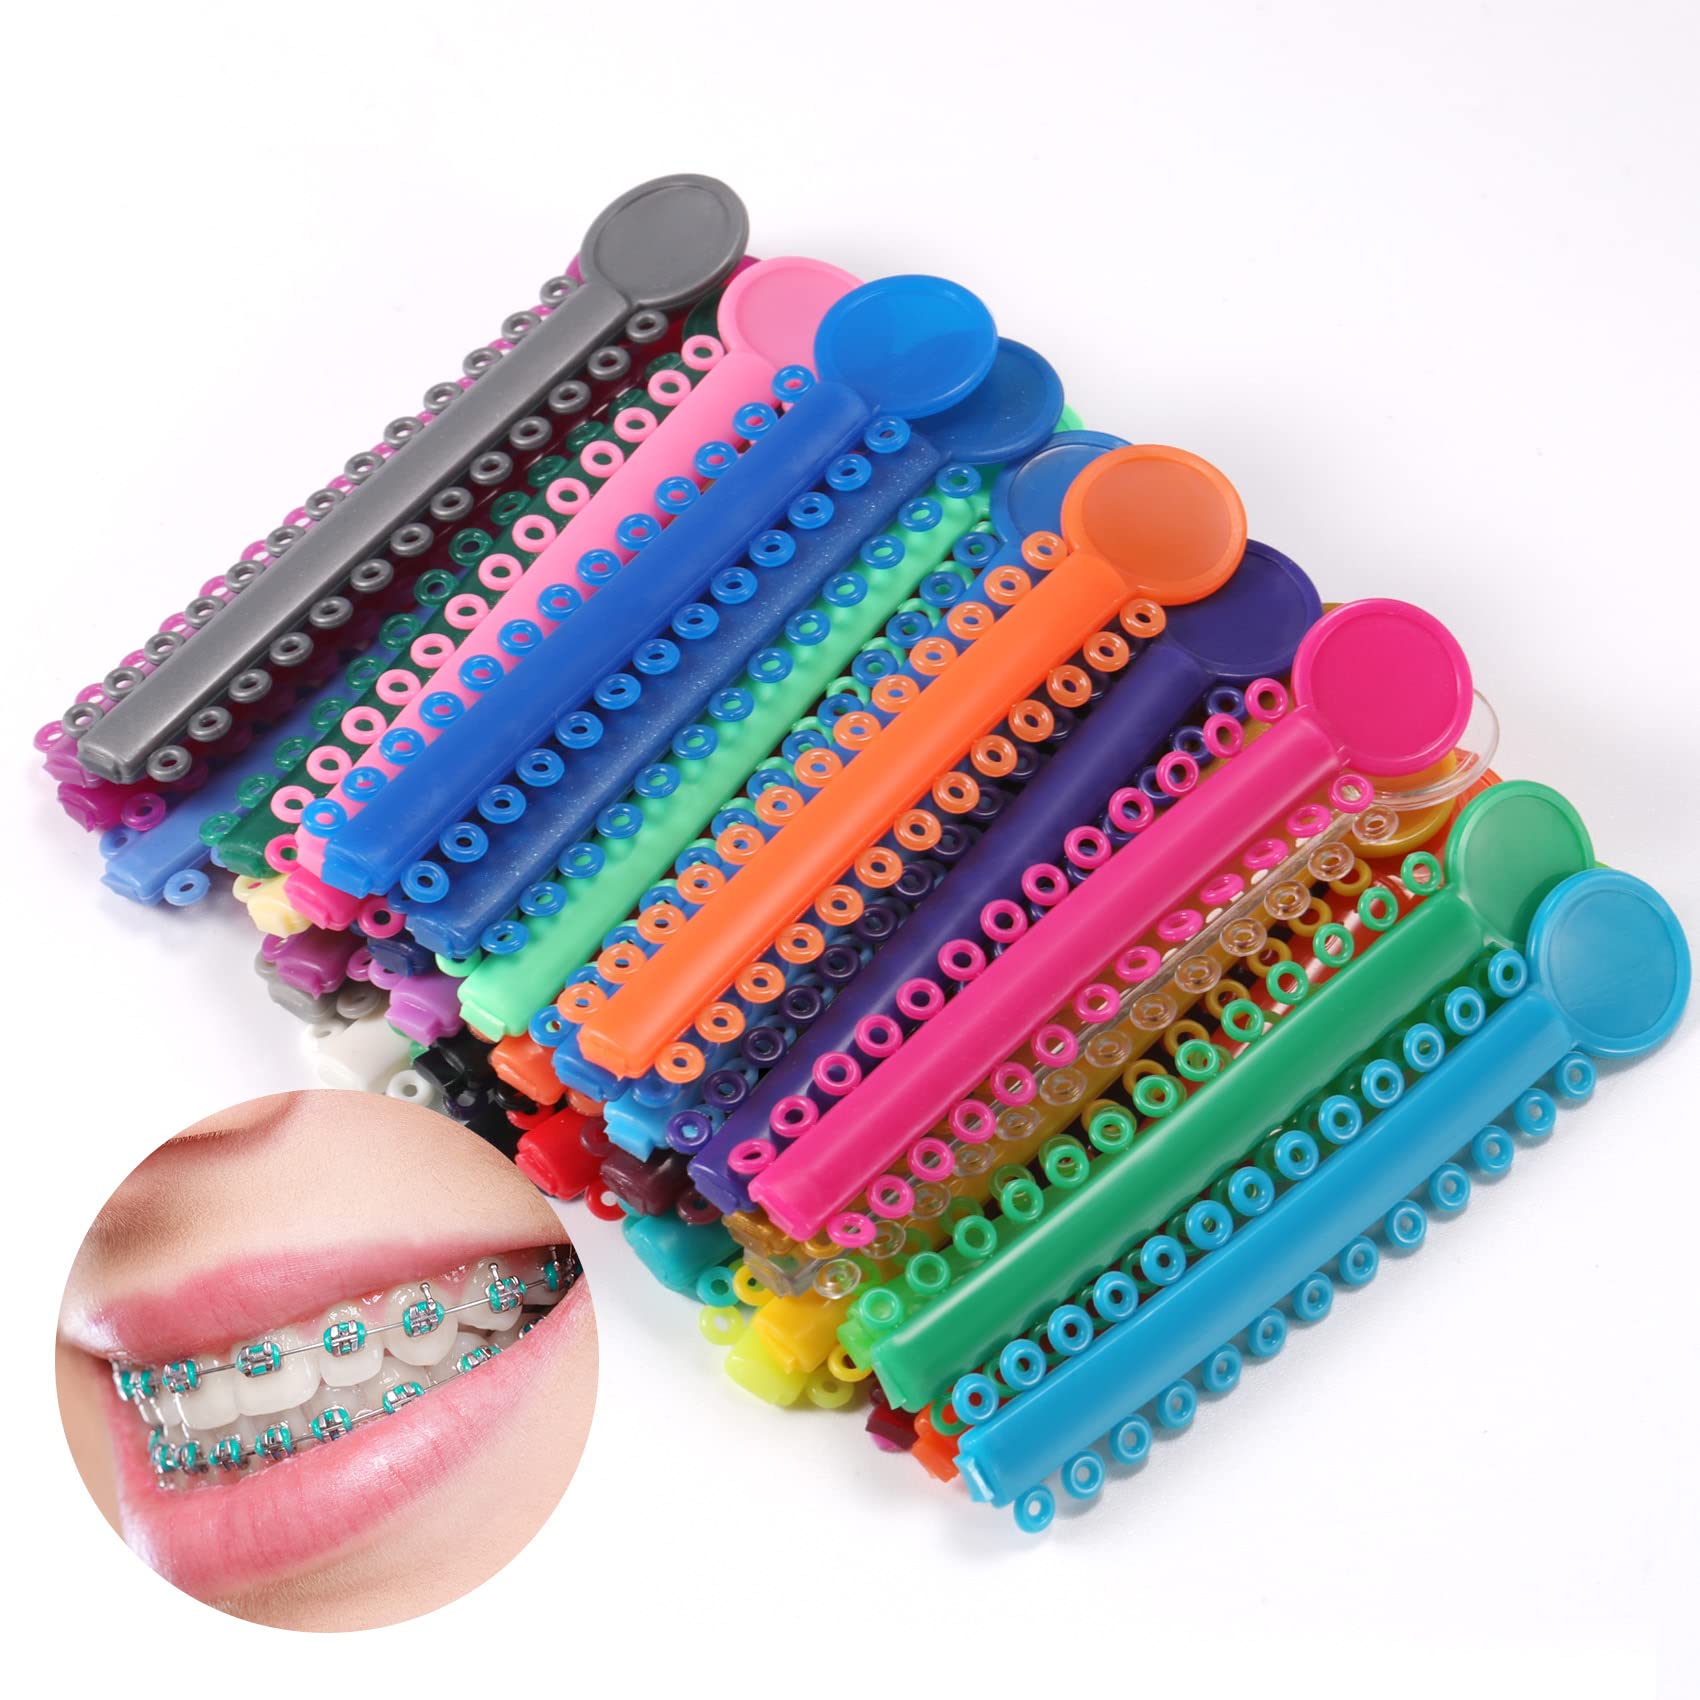 Orthodontic Ligature Ties, Multi-Color Orthodontic Elastomeric O-Rings  Braces Rubber Bands, Assorted Dental Ligature Elastic Rubber Ties, 1040 Pcs